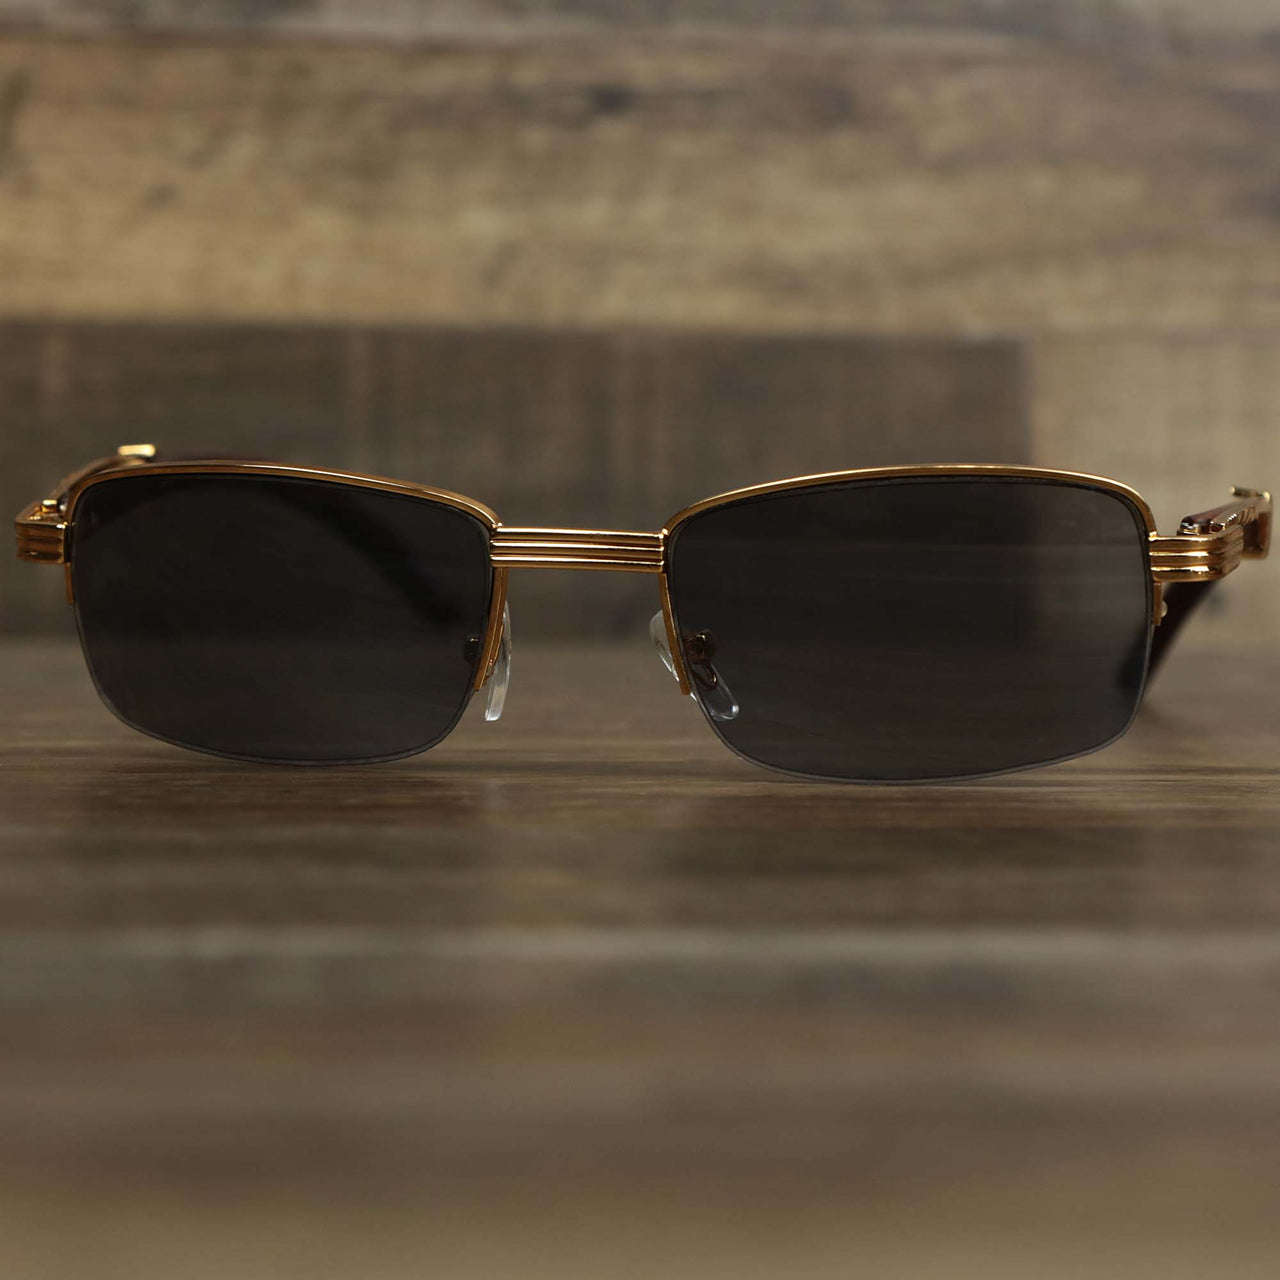 The Rectangle 3 Row Frame Black Lens Sunglasses with Gold Frame